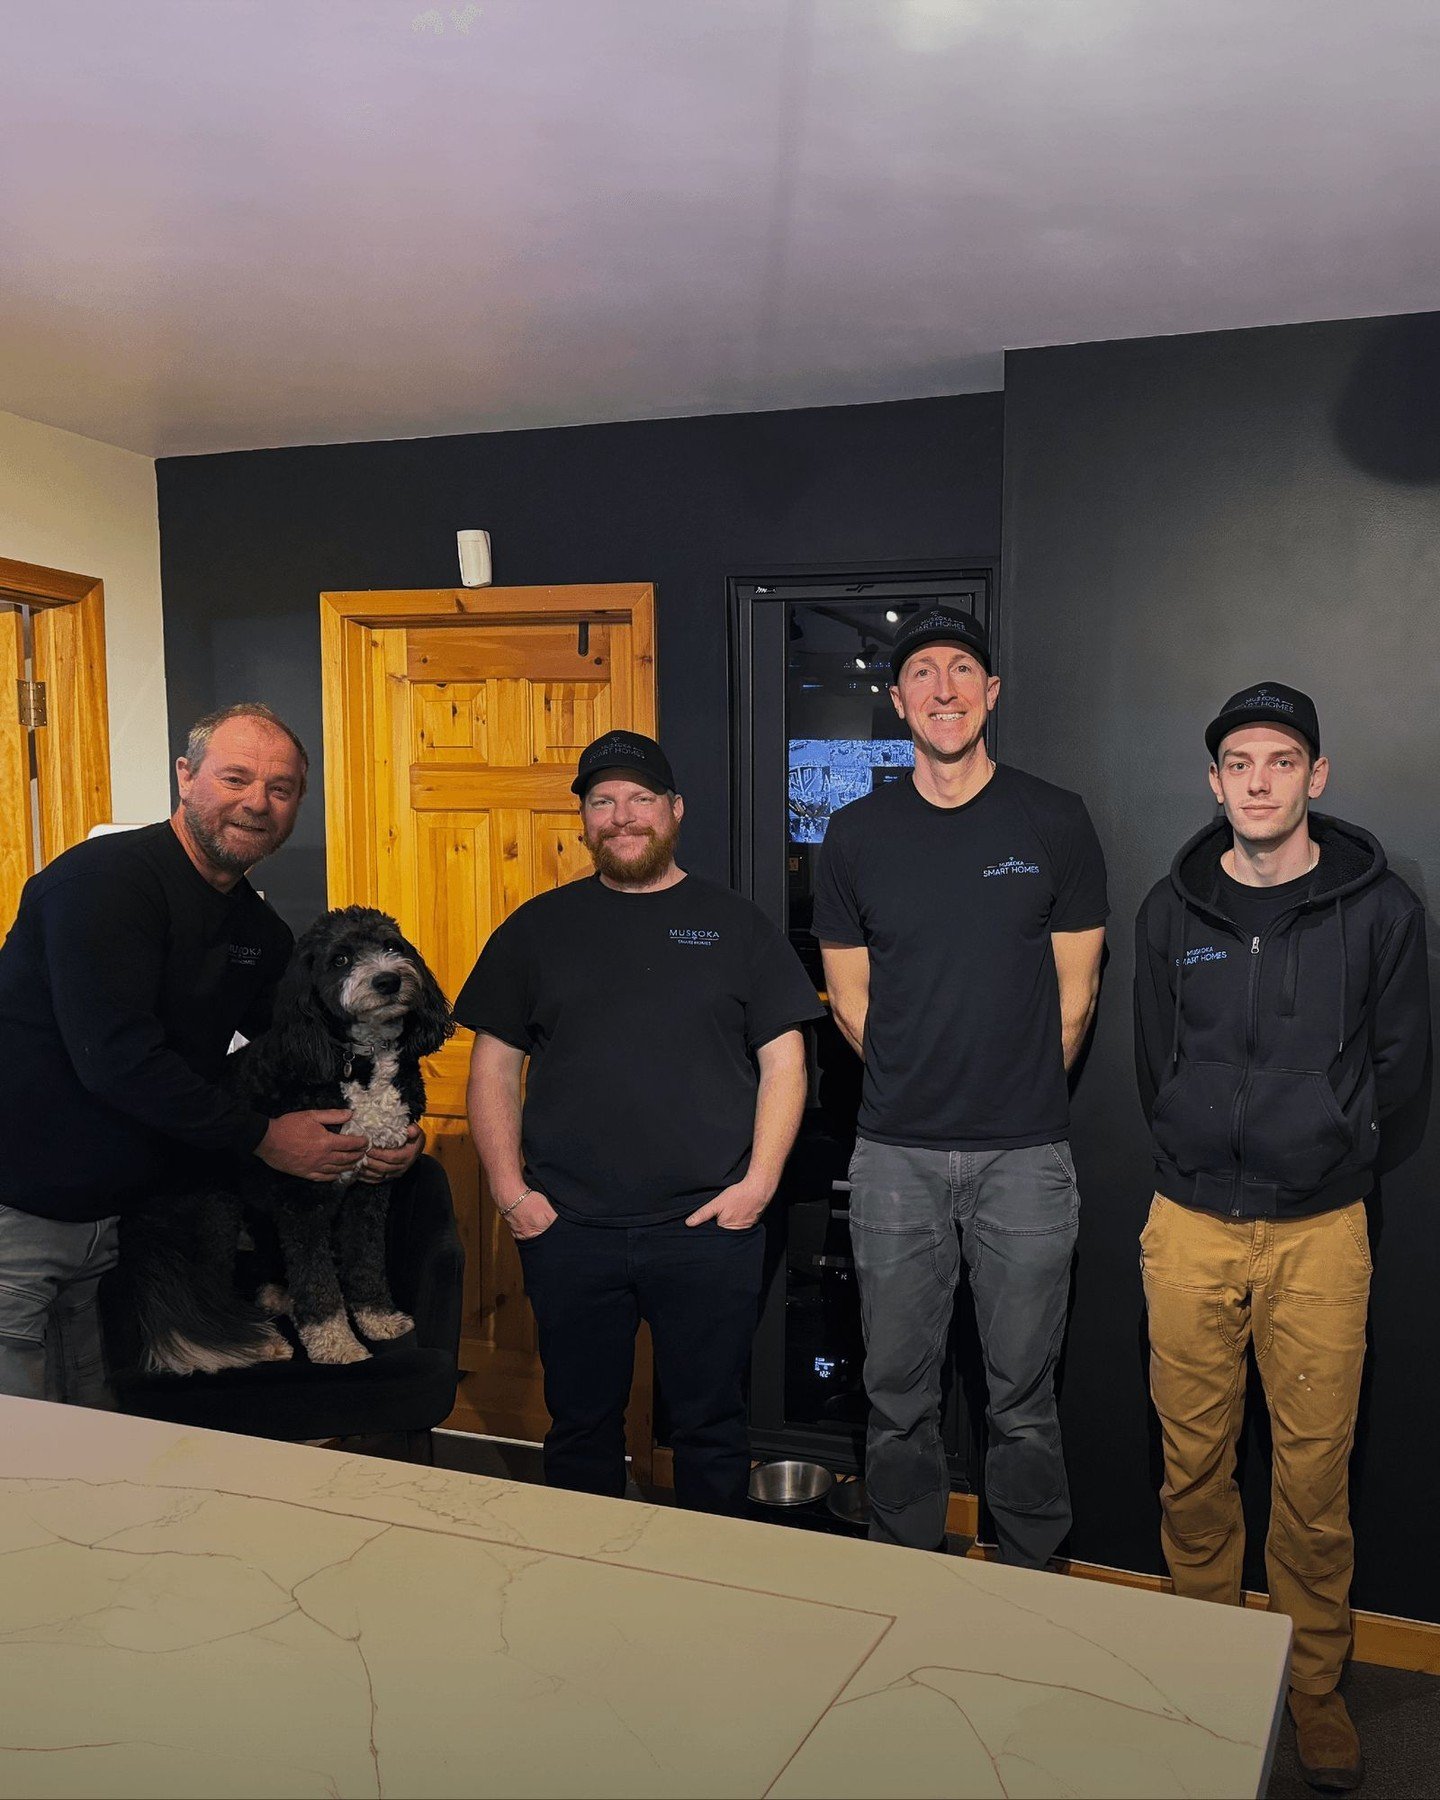 Adam and Neil have both received accreditation from Lutron to install and program Lutron's exclusive luxury line, Homeworks for lighting &amp; shades. 

As a small business, we always take great pride in our team and their growth. As a Lutron Platinu